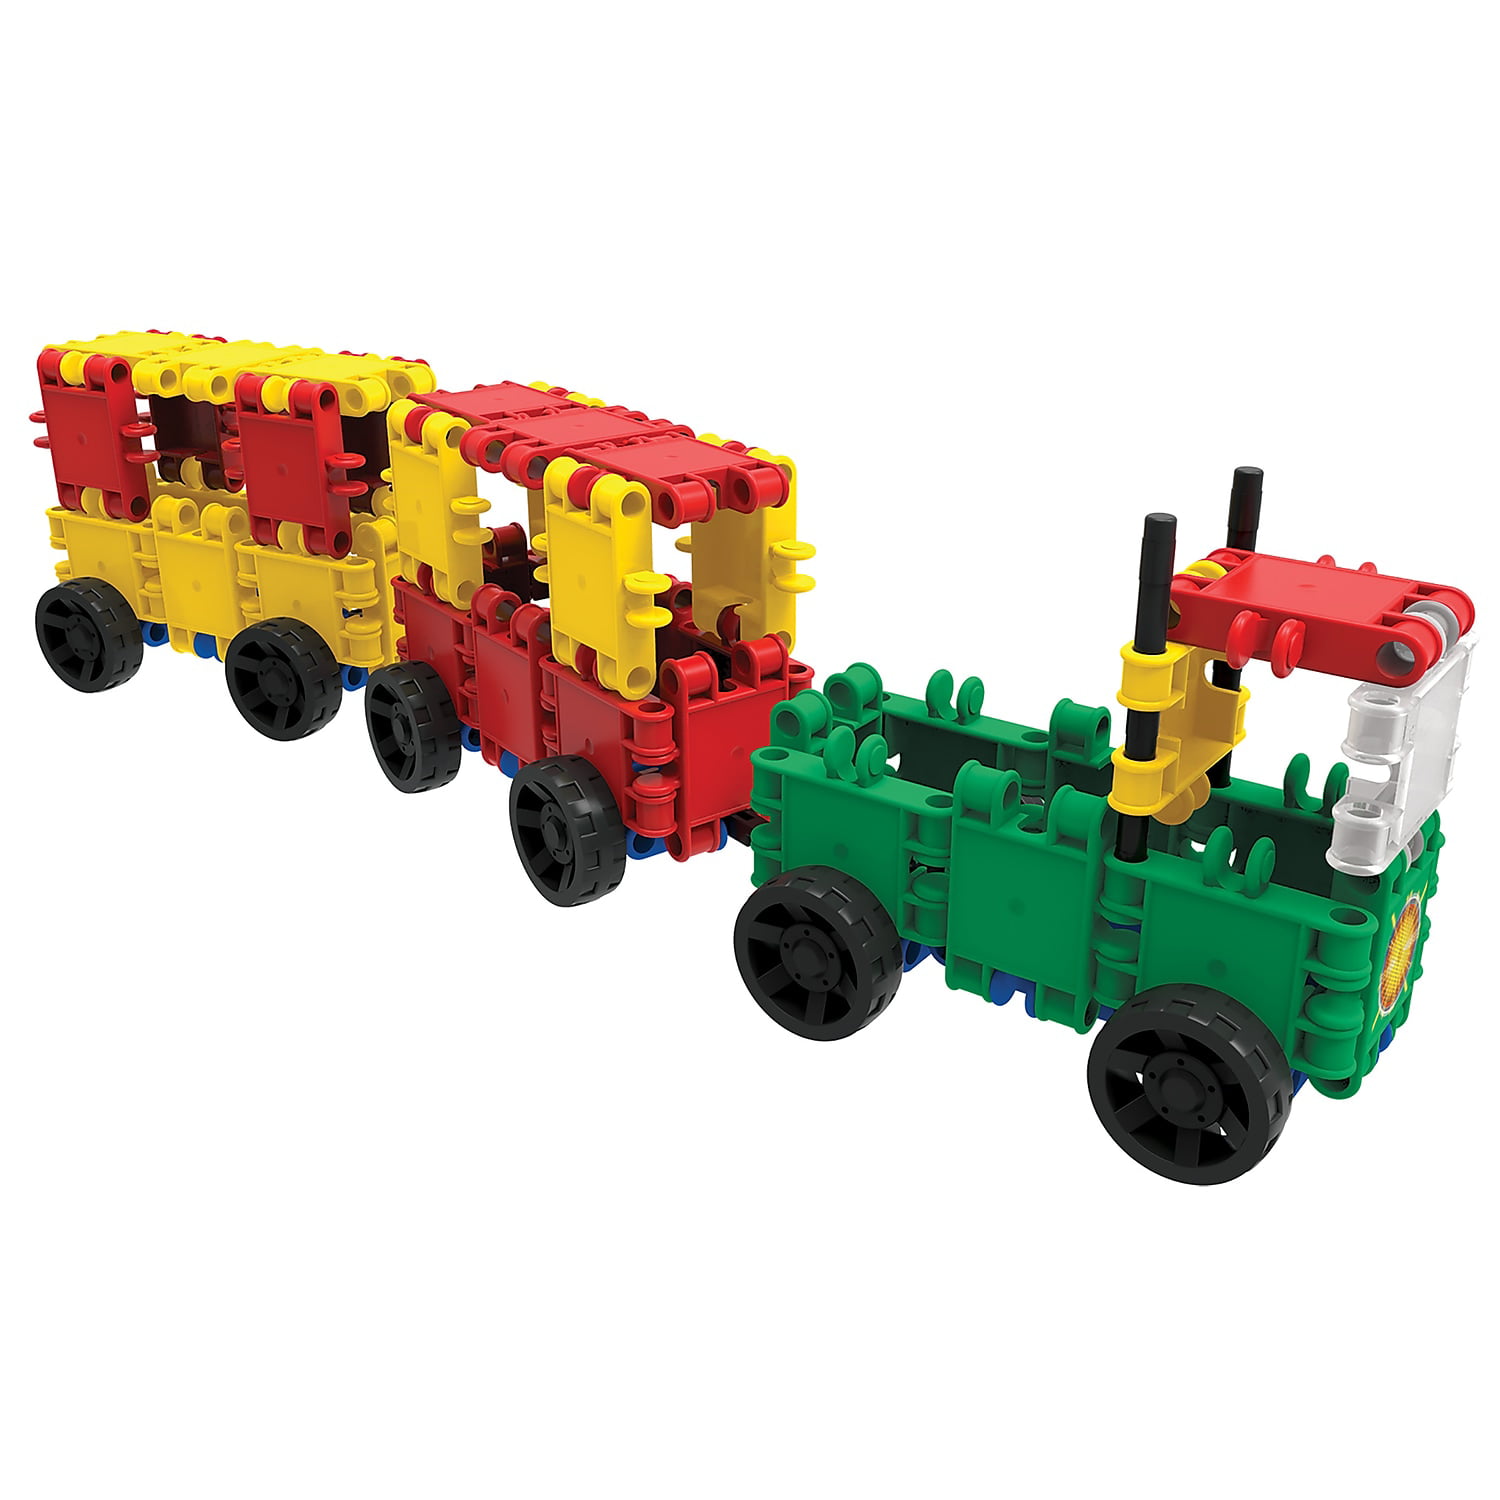  Clics Basic Set of 560 Pieces, Construction Toys for 3